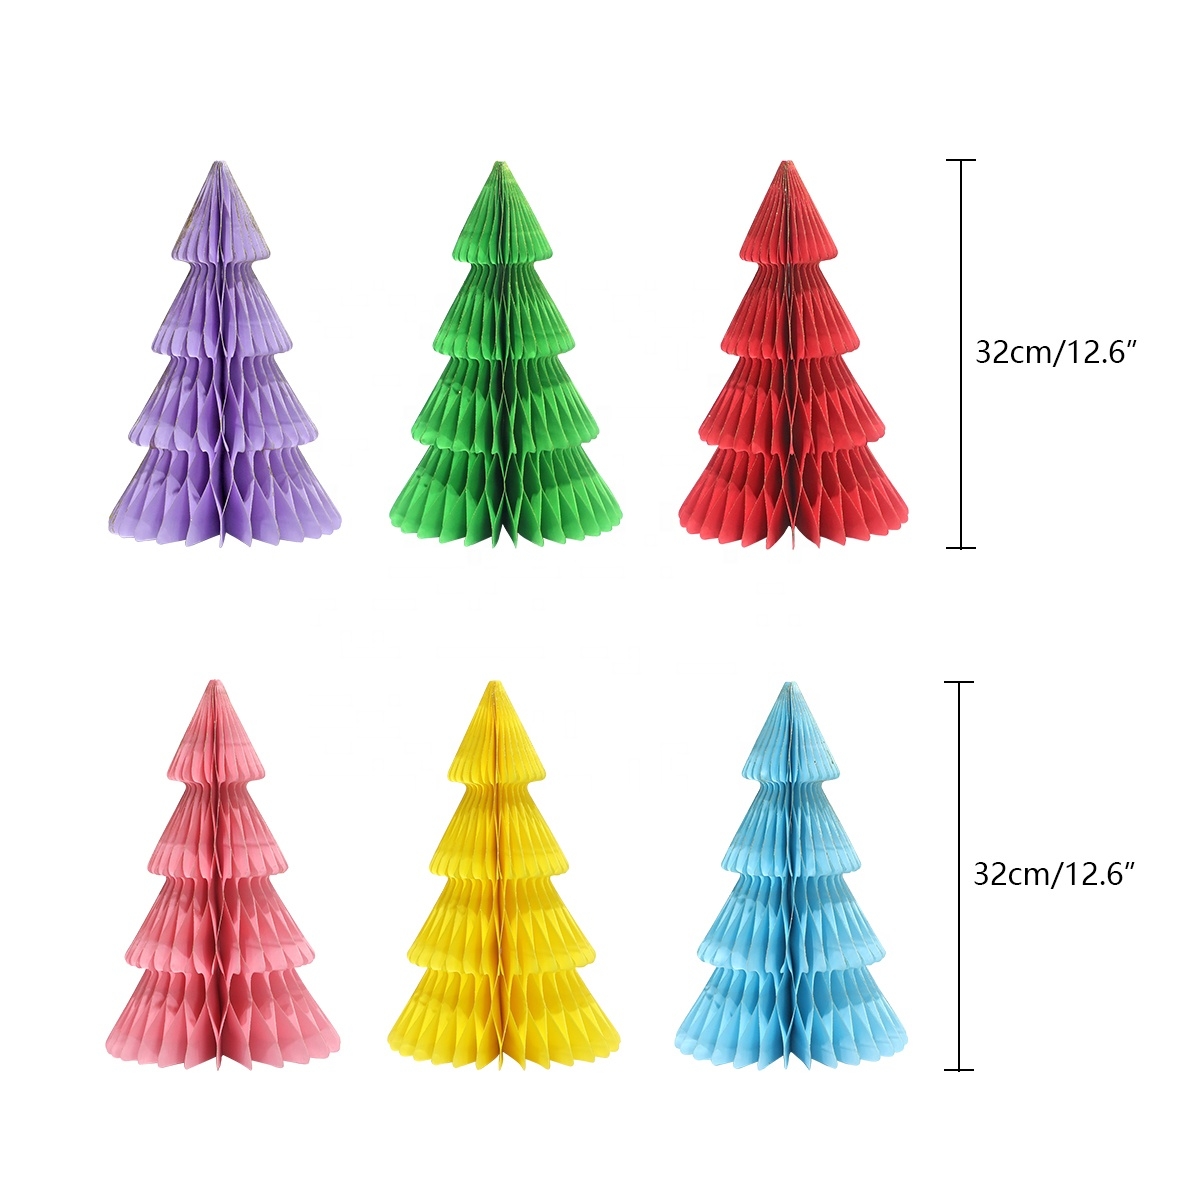 32Cm Colorful Christmas Paper Tree Decorations With String Ornament Honeycomb-GOON- Home Decoration, Christmas Decoration, Halloween Decor, Harvest Decor, Easter Decor, Thanksgiving Day Decor, Party Decor